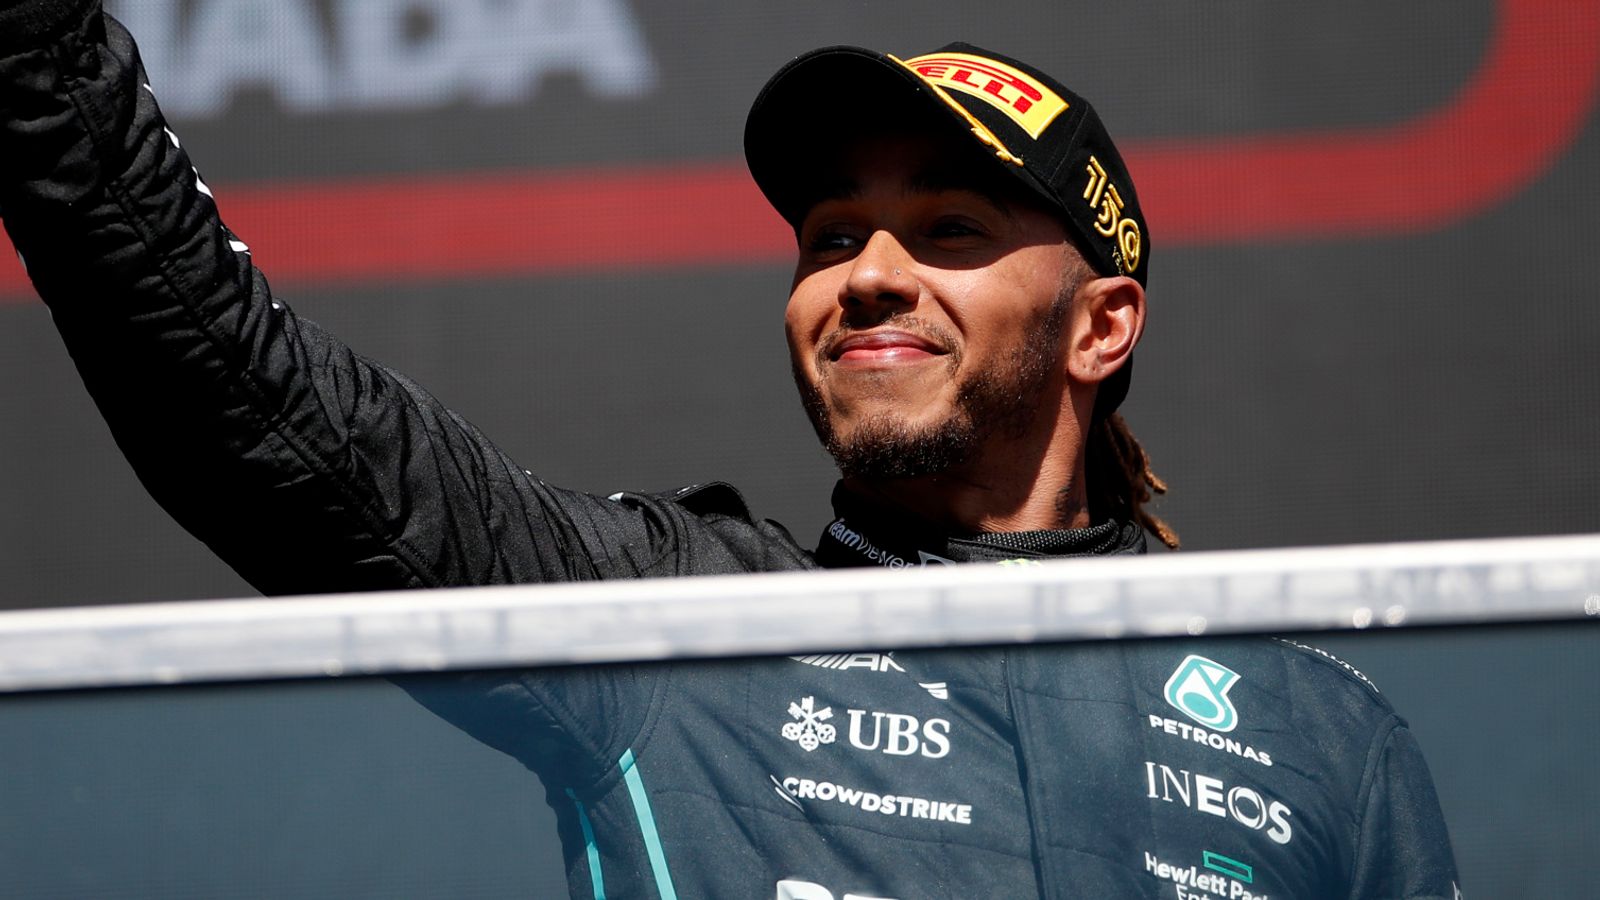 Lewis Hamilton says Canadian Grand Prix podium finish has given him so much hope and confidence